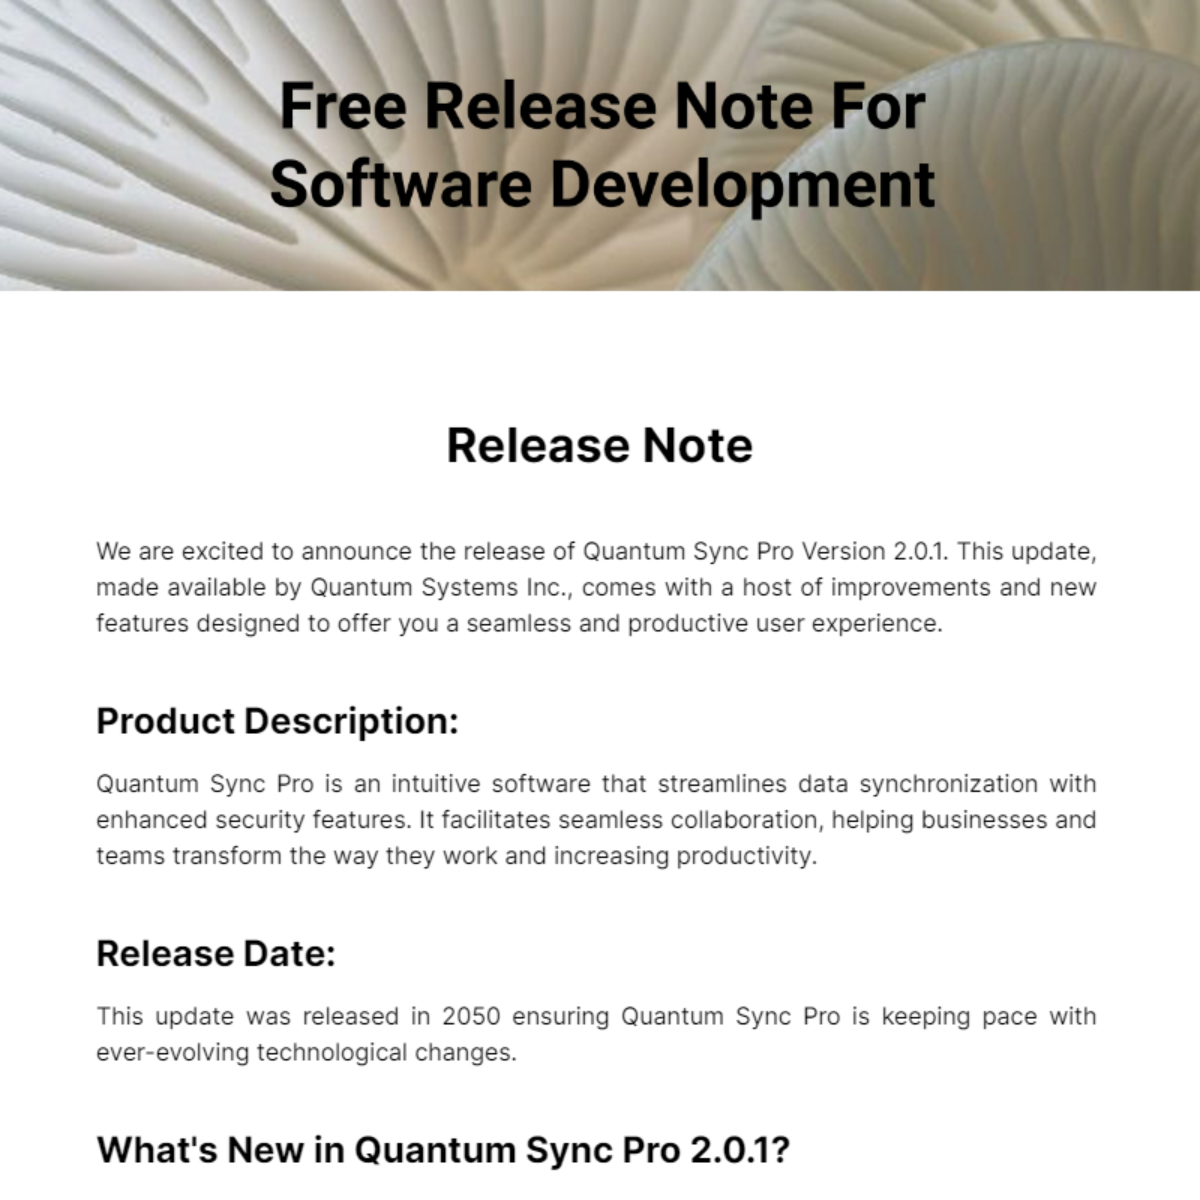 Release Note For Software Development Template